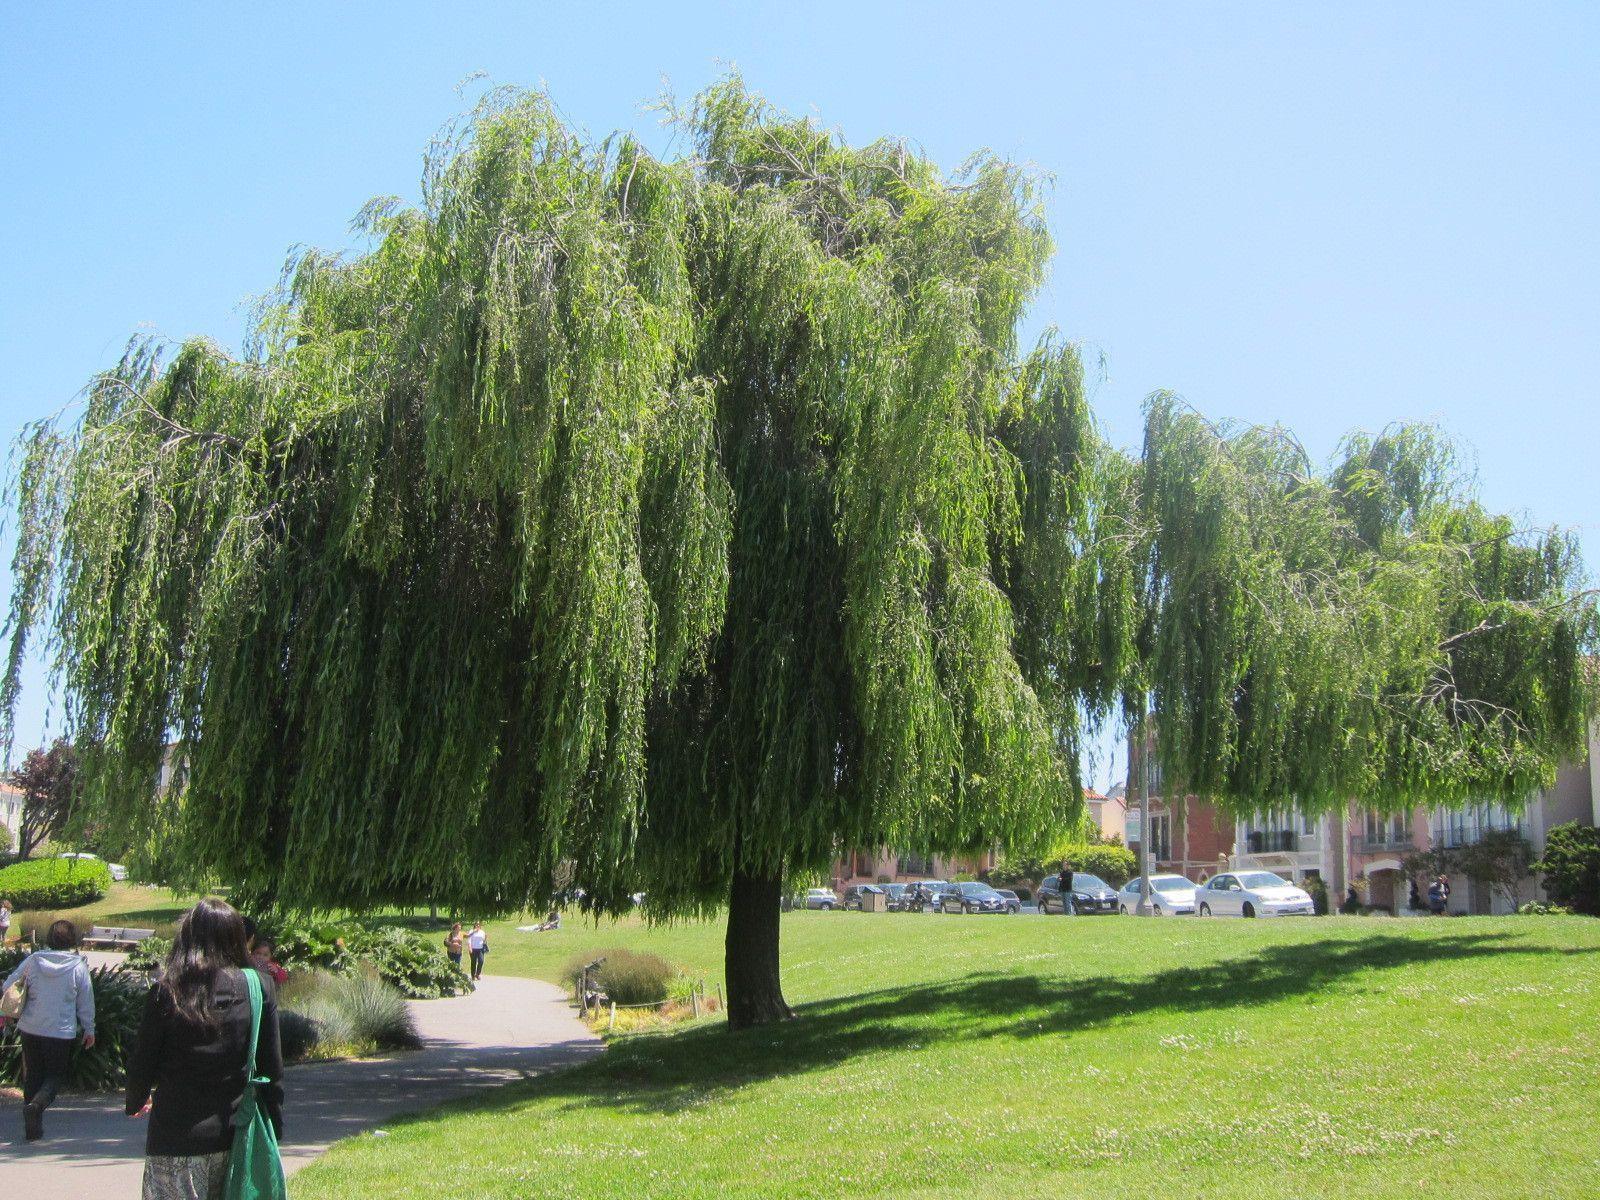 image For > Weeping Willow Tree Wallpaper